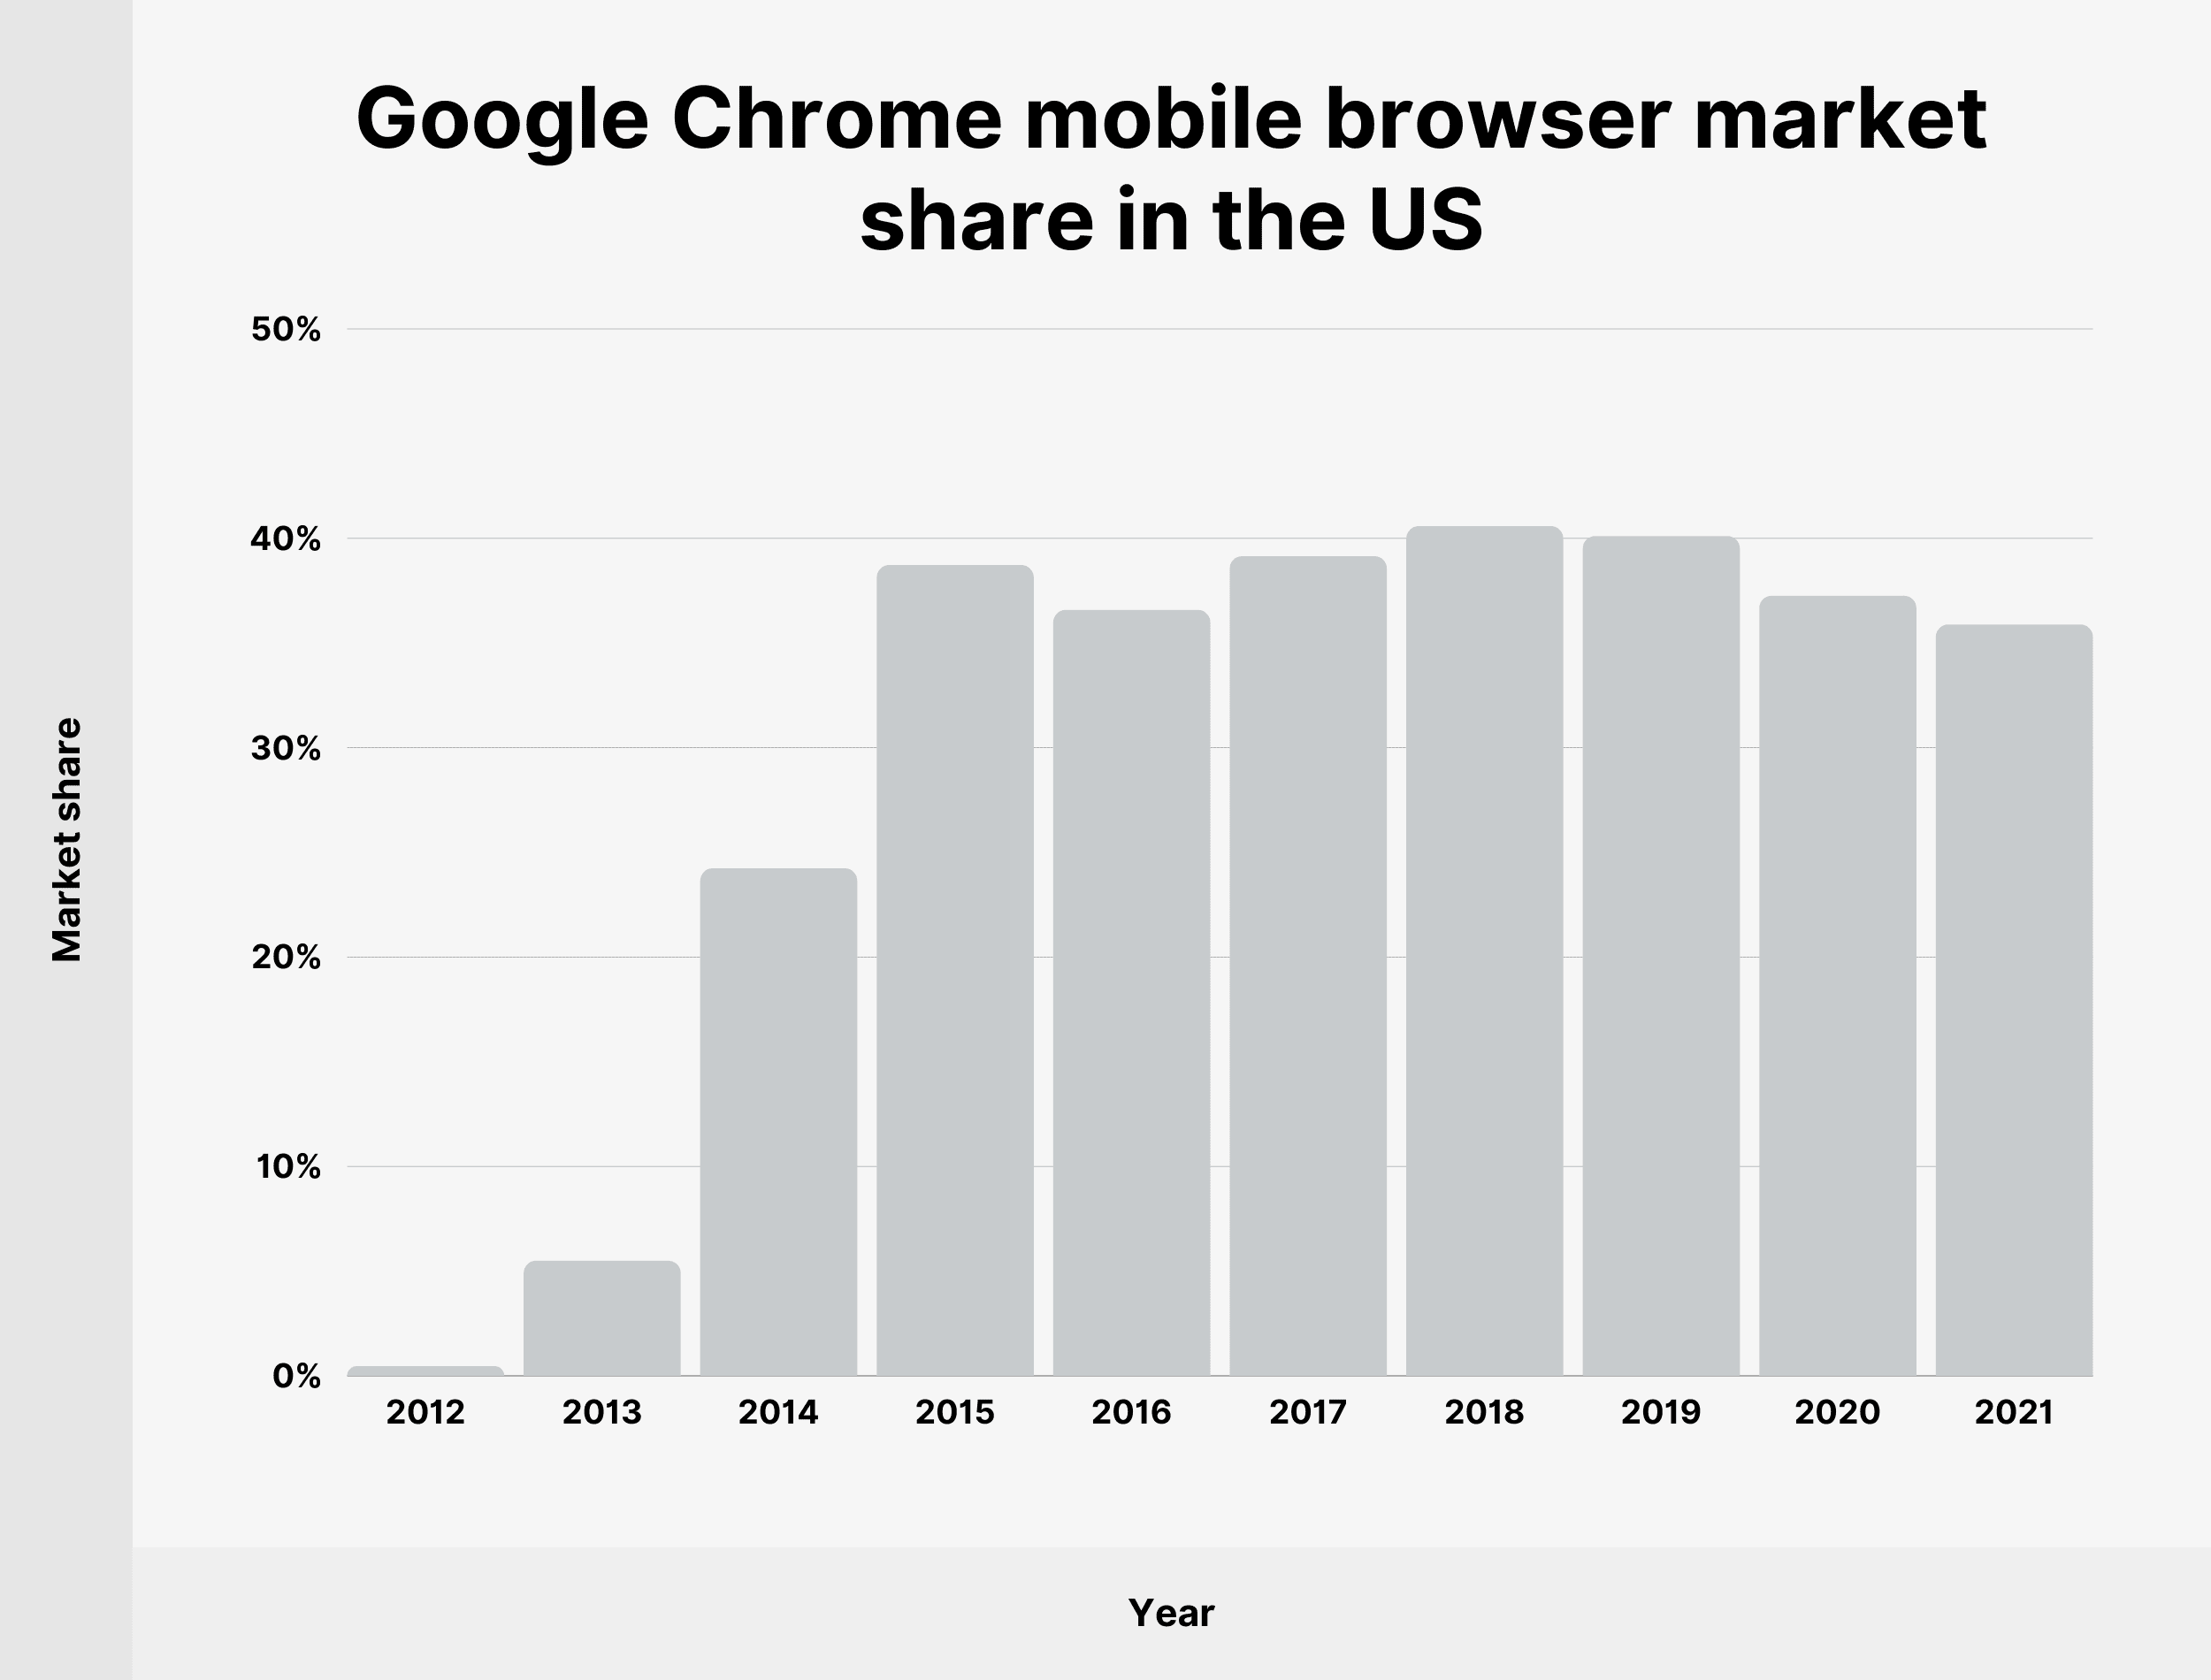 Google Chrome mobile browser market share in the US